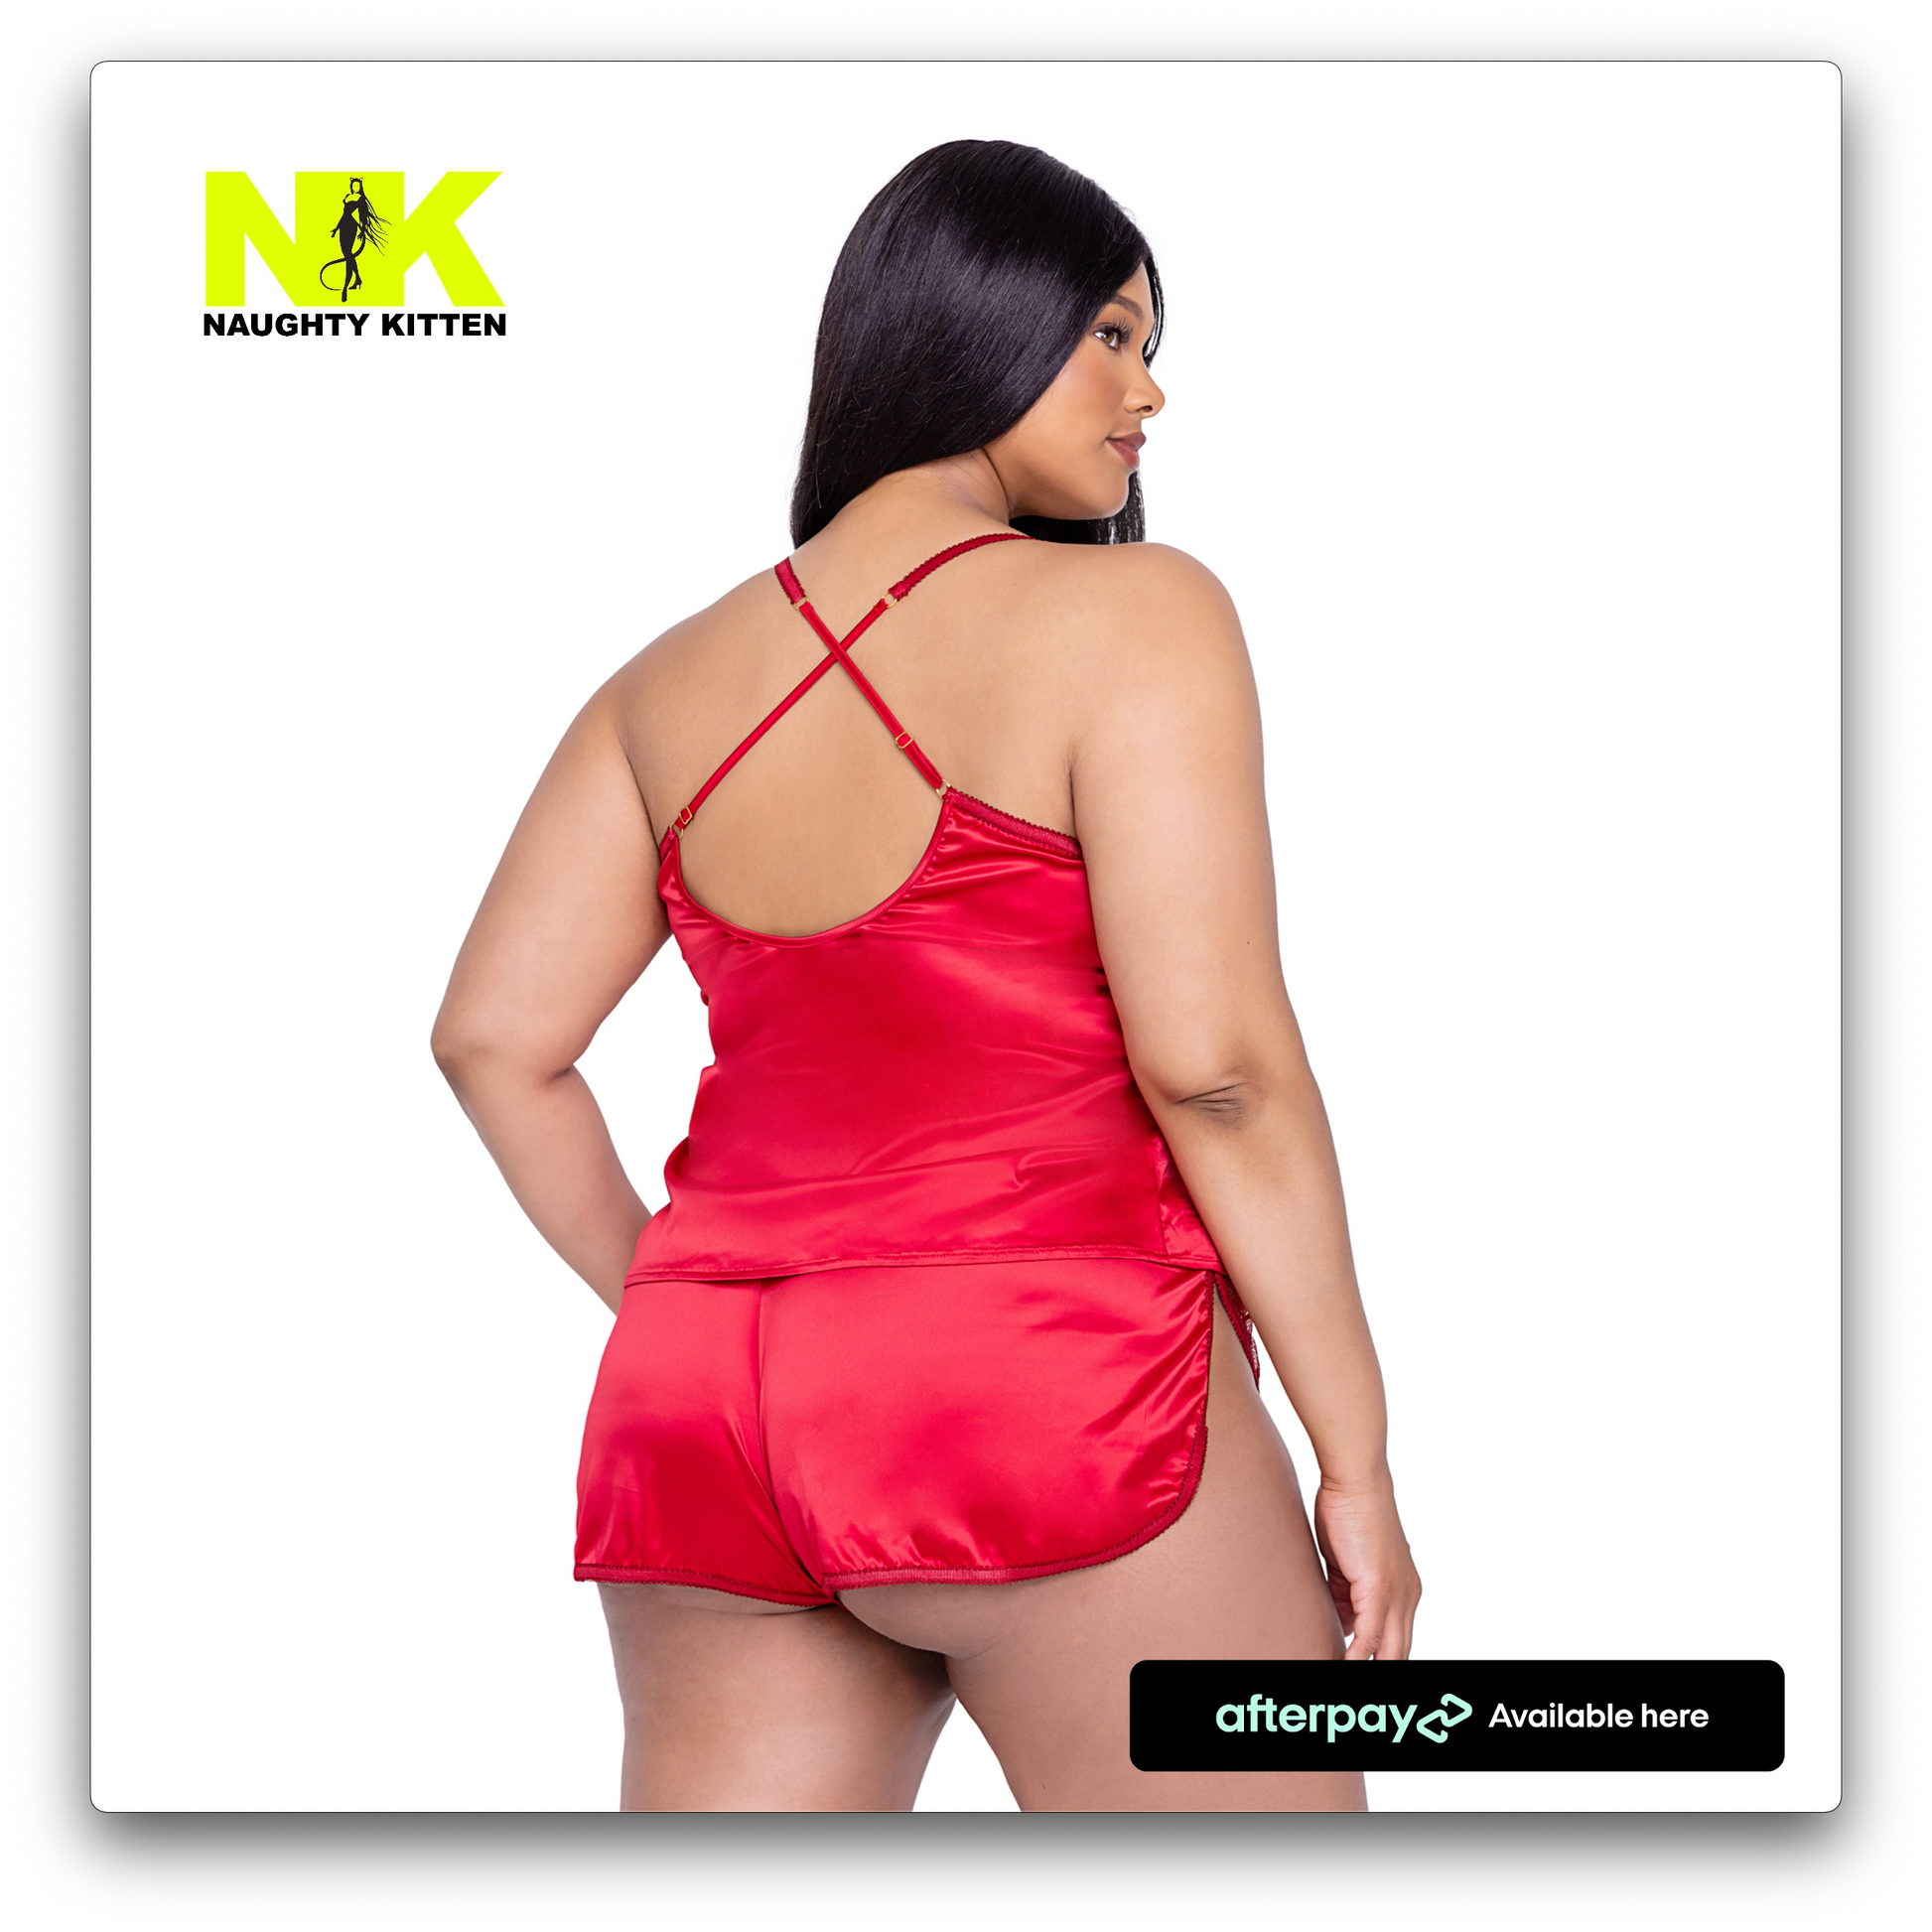 Naughty Kitten Clothing Rouge Bow 2-Piece Camisole Lounge Plus Size Set Back Rear View Lingerie Loungewear